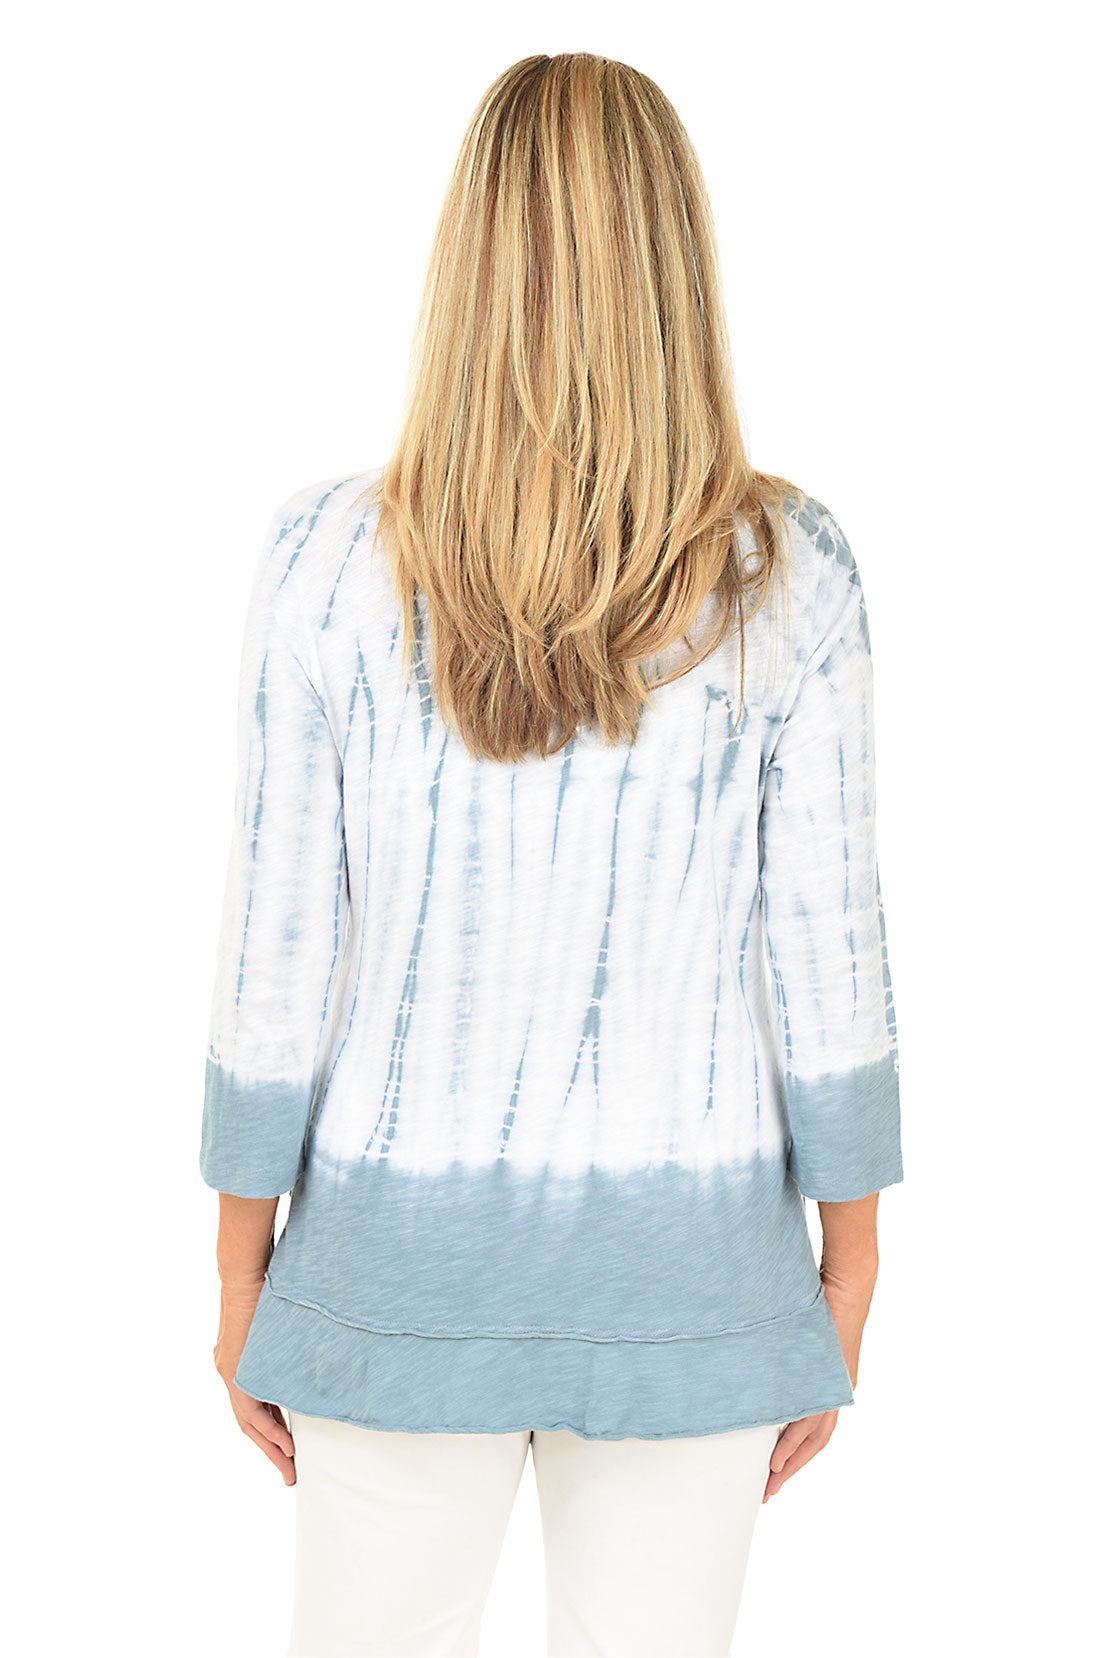 Storm Mineral Wash Ruffle Knit Top